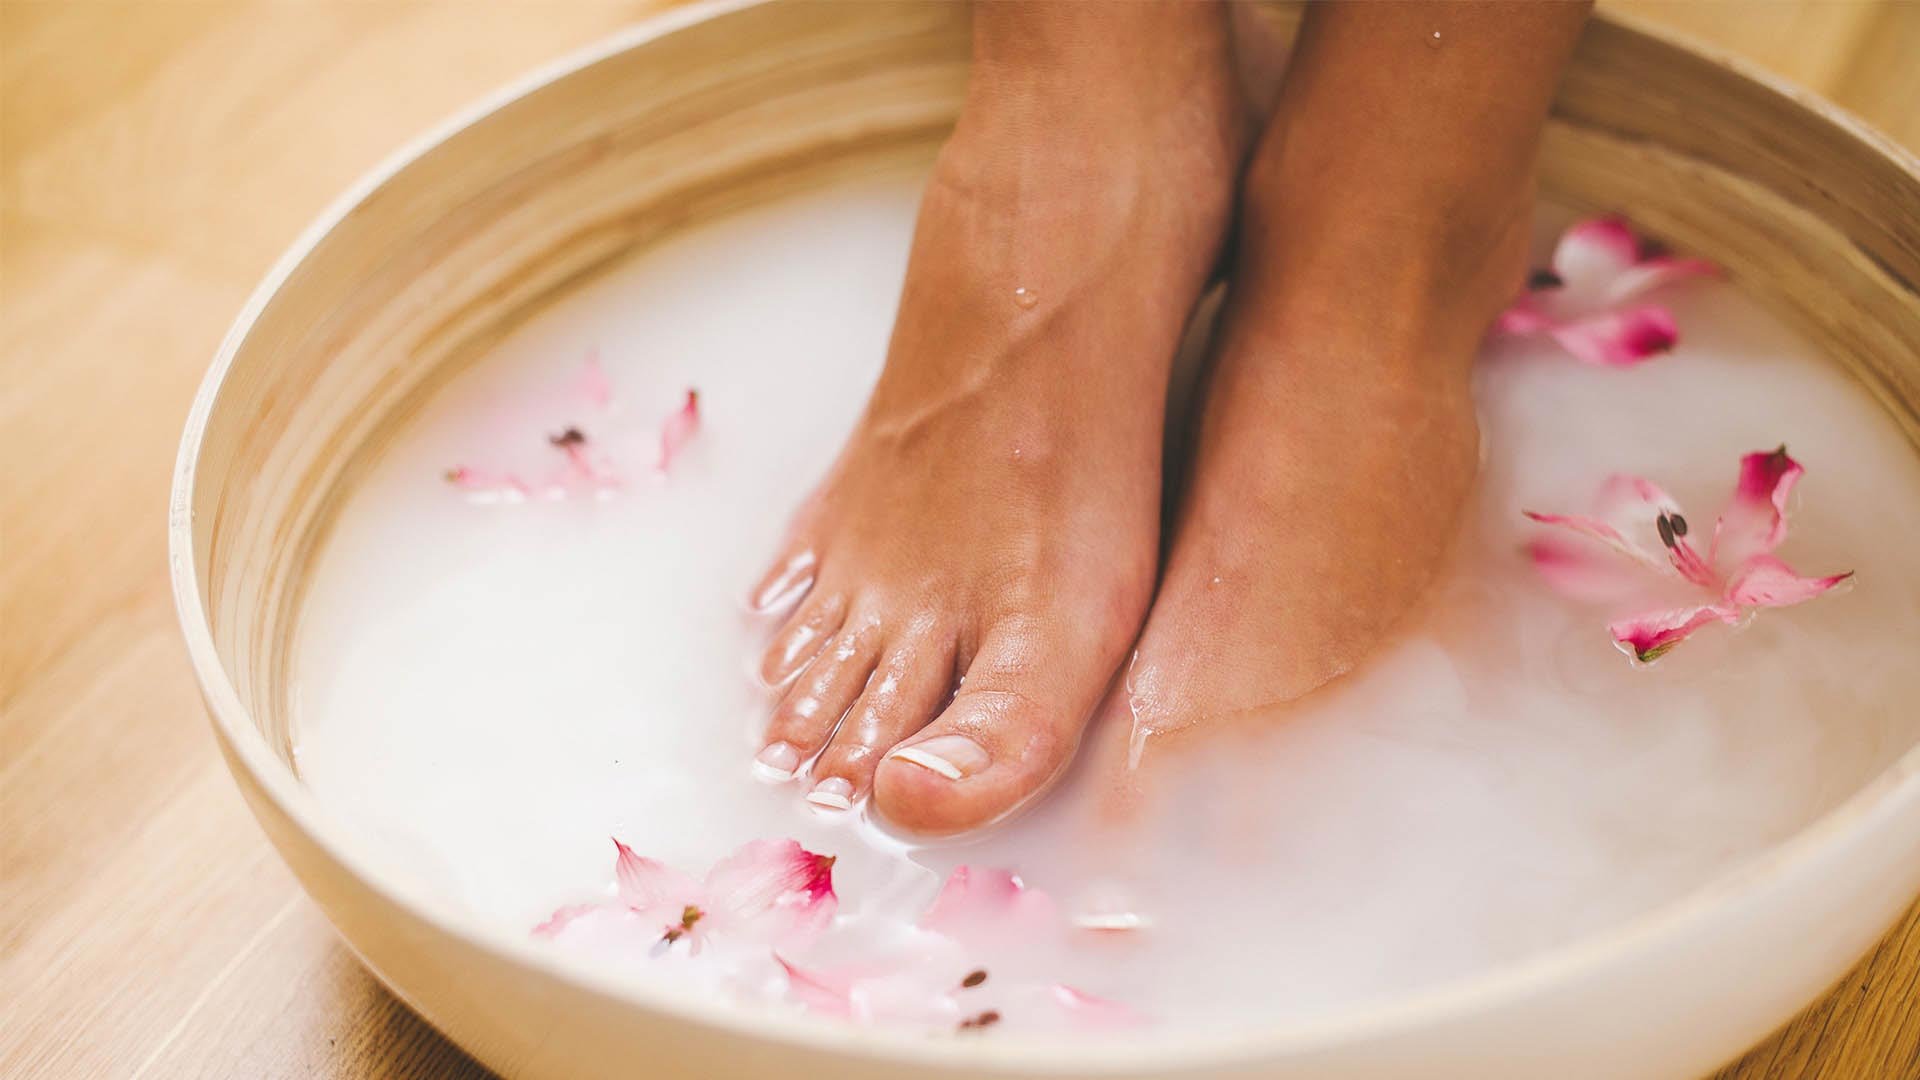 Loreal Paris Article How to Do a Foot Detox and Help Smelly Feet D